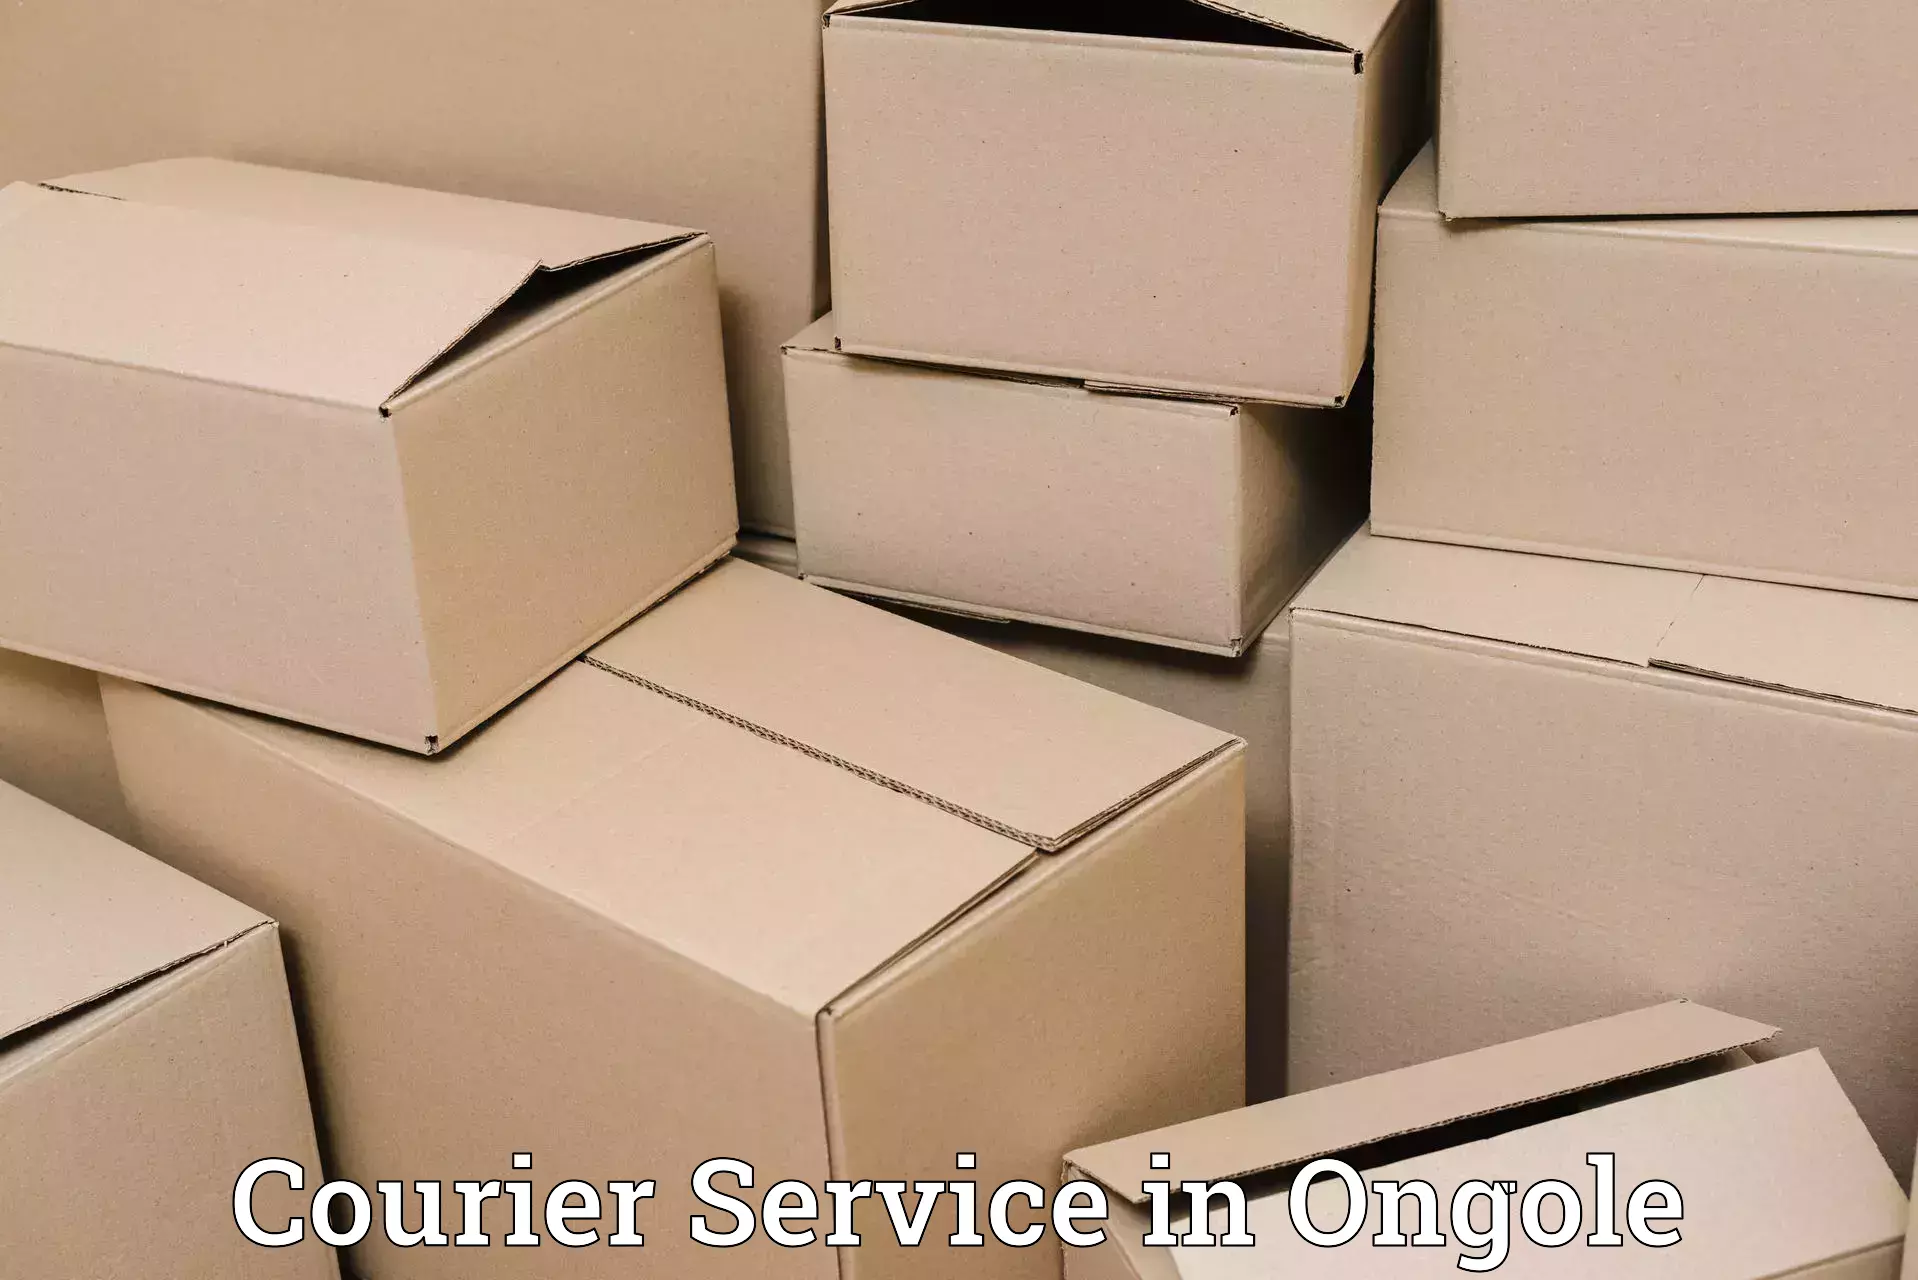 Doorstep delivery service in Ongole